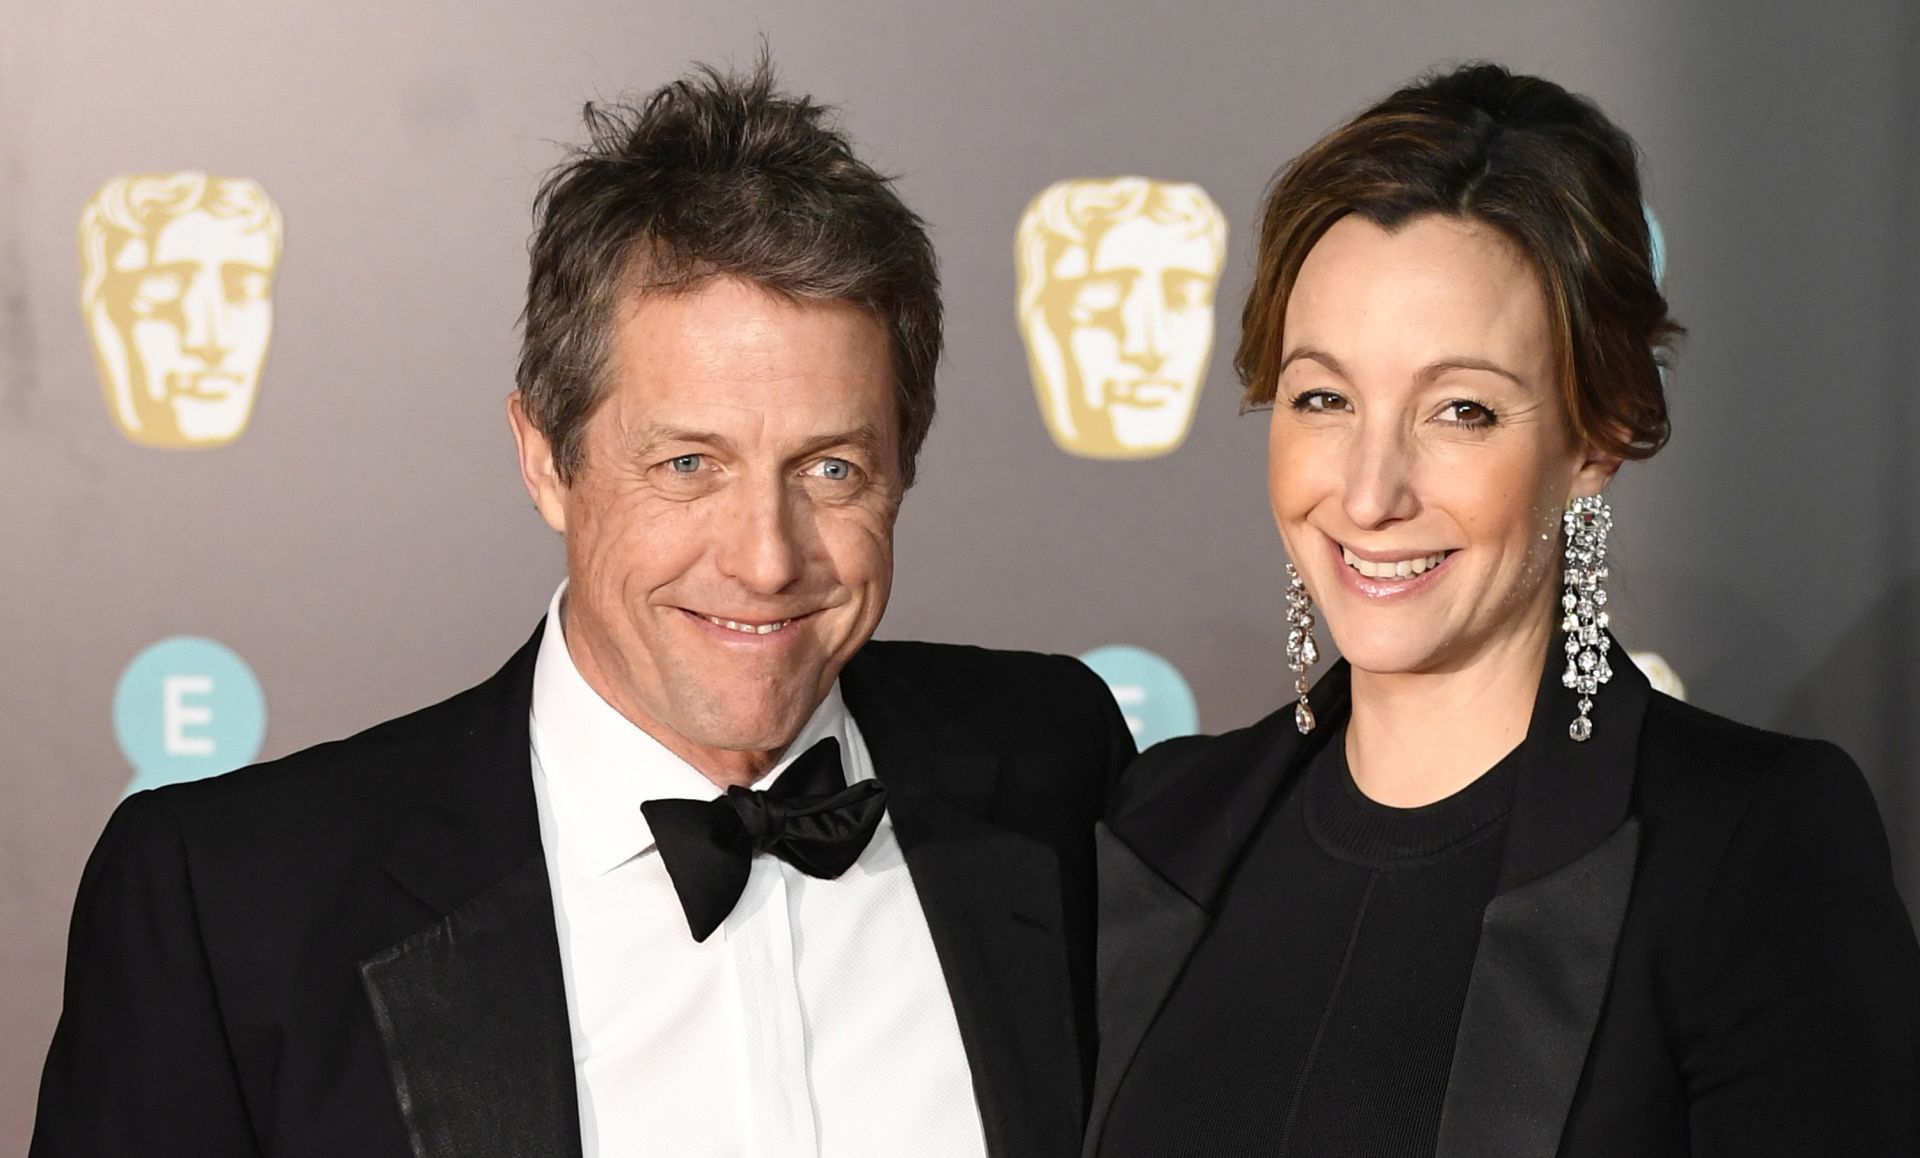 epa06756291 (FILE) - British actor Hugh Grant (L) and producer Anna Eberstein (R) arrive ahead of the 71st annual British Academy Film Awards at the Royal Albert Hall in London, Britain, 18 February 2018 (reissued 22May 2018). According ti media reports, Hugh Grant (57) is set to marry Swedish TV producer Anna Eberstein (39), the mother of three of his children. It will be Grant's first marriage.  EPA/NEIL HALL *** Local Caption *** 54132763